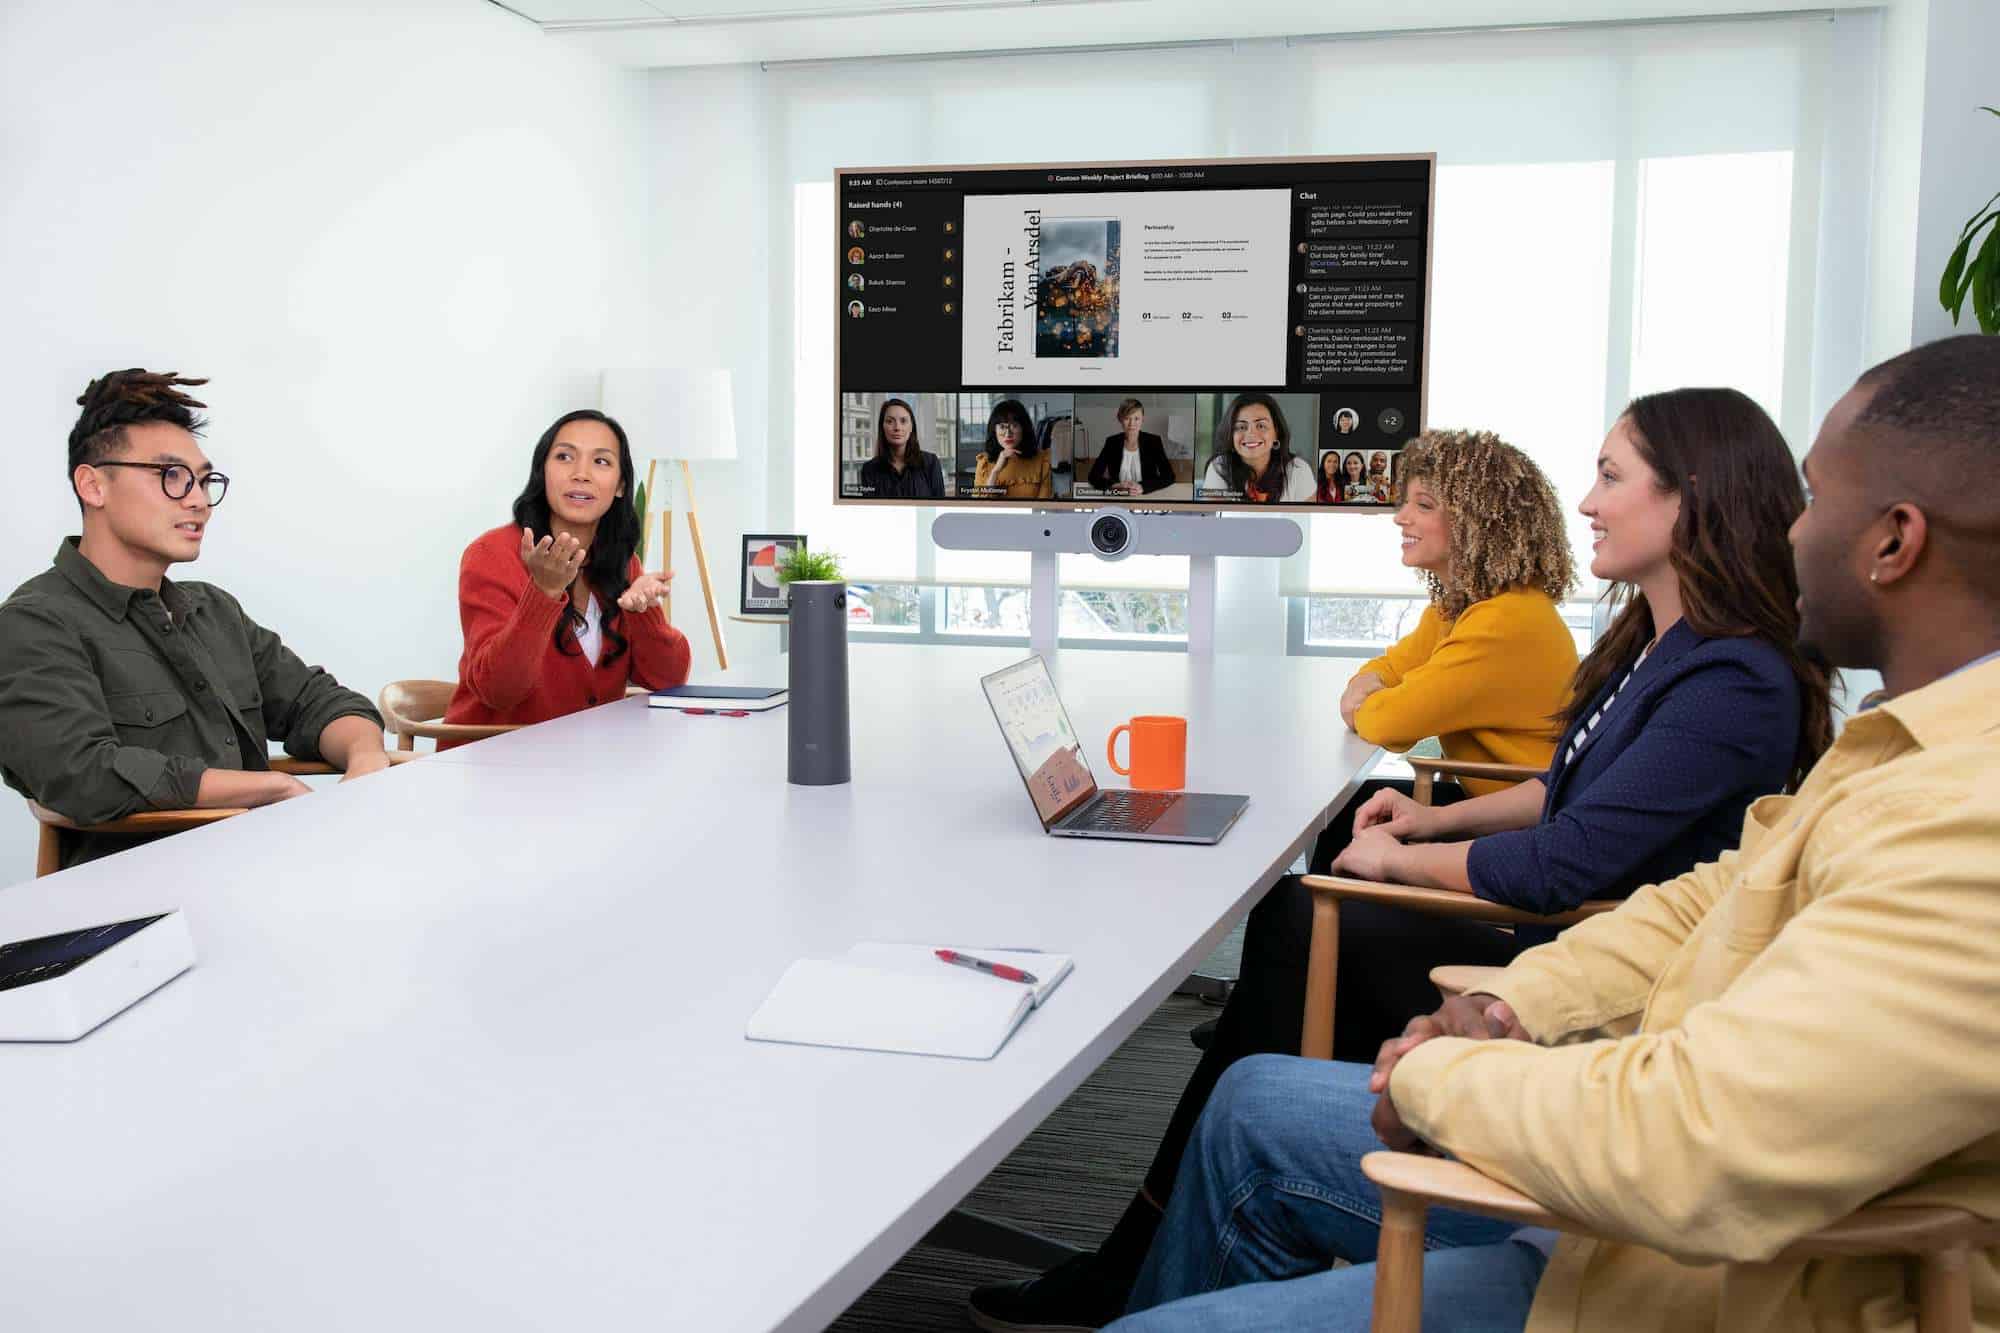 Five people participate in a virtual meeting held in a conference room with white walls and teams rooms equipment. At the head of the room a screen displays remote attendees and a presentation.